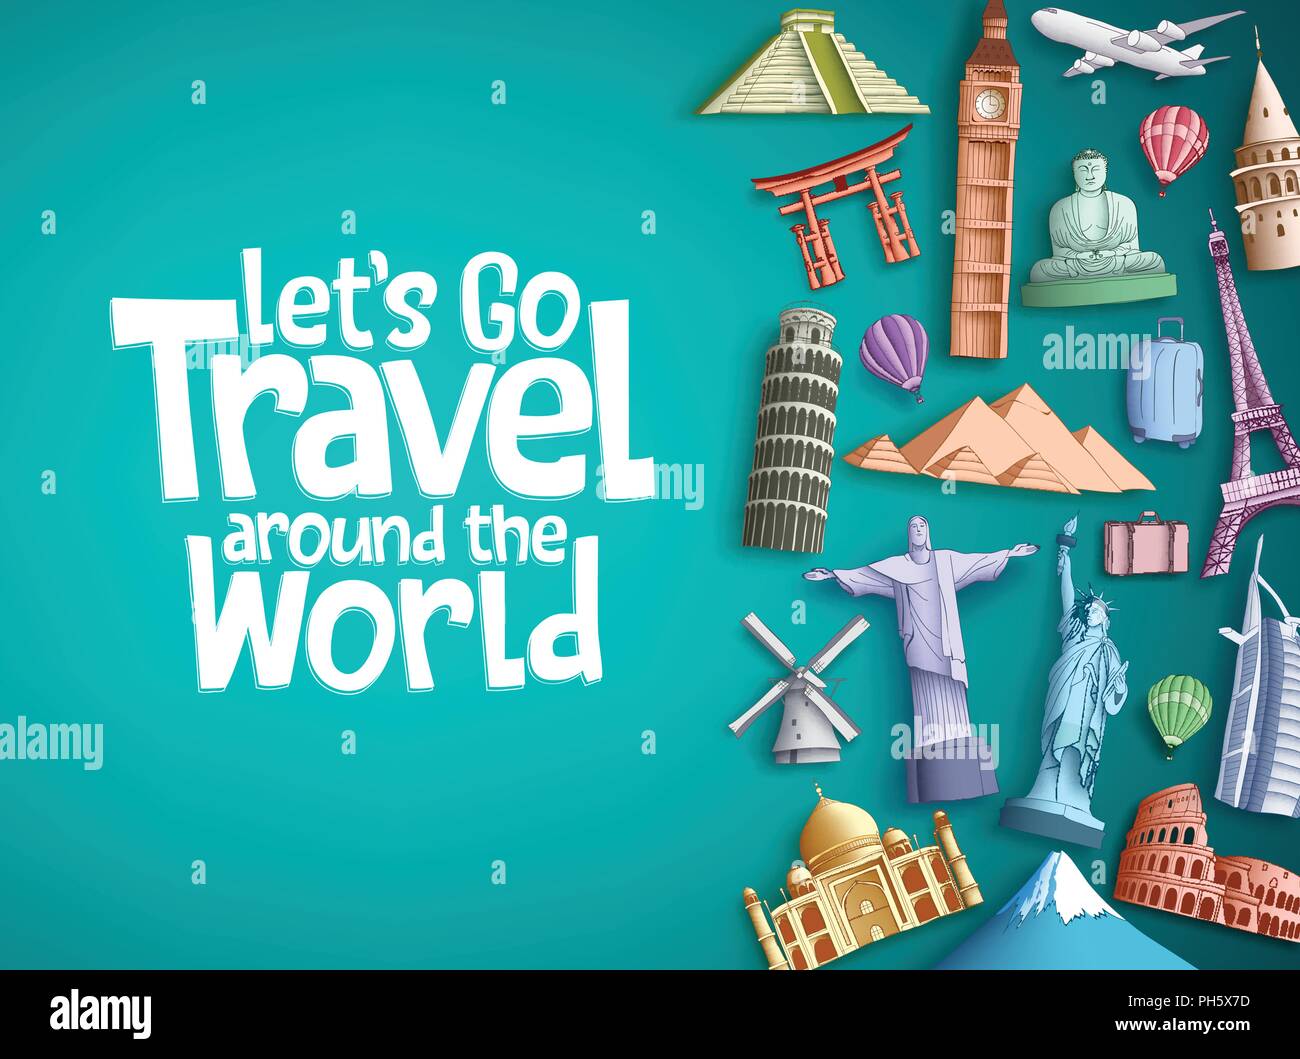 Travel around the world vector background design with famous tourism ...